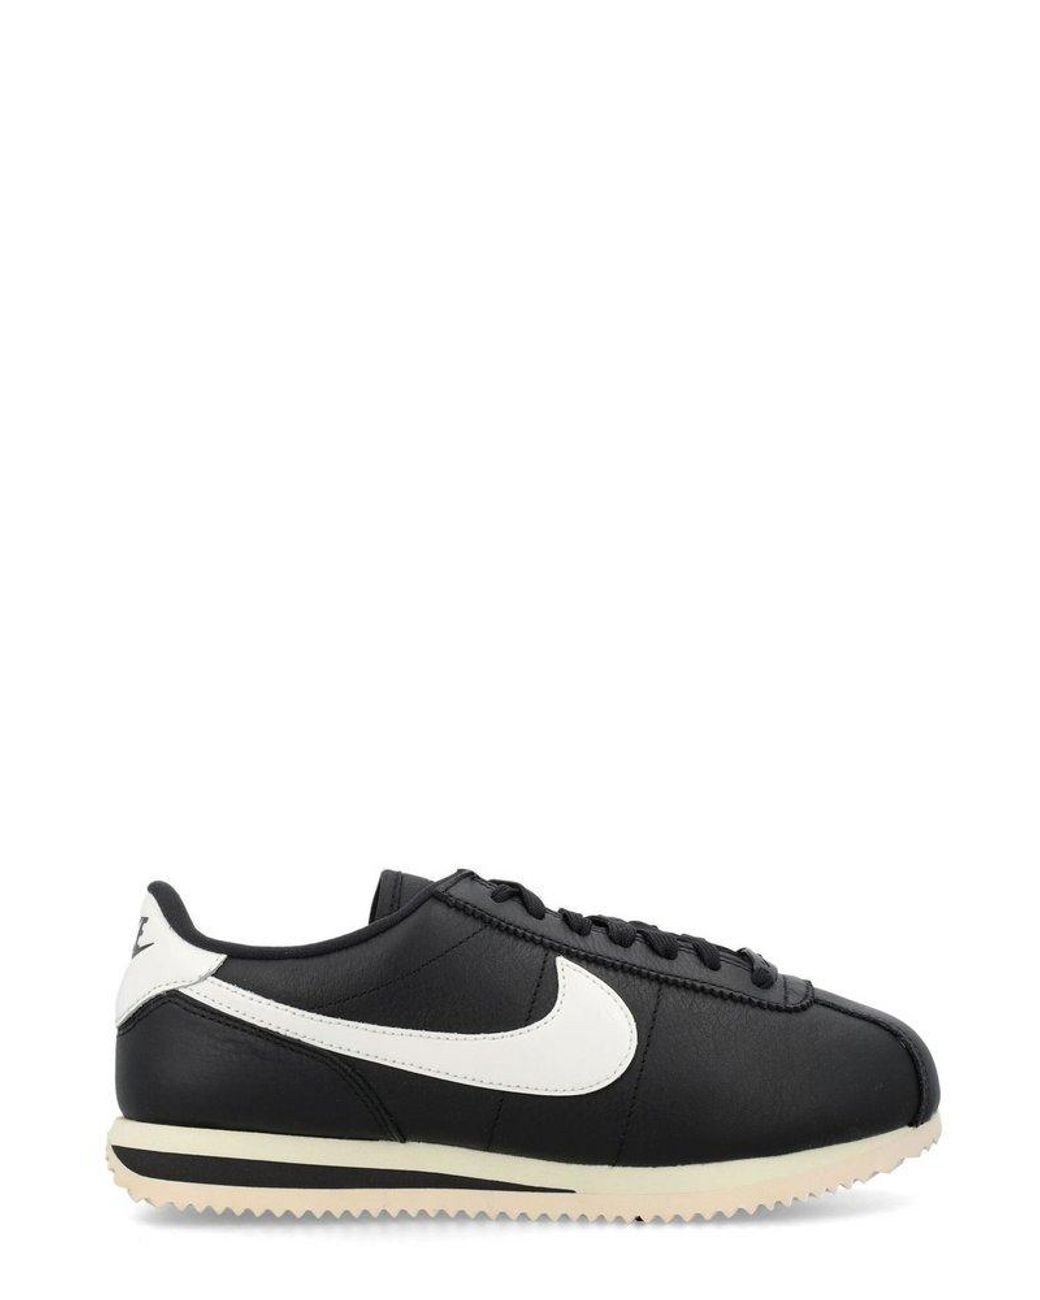 Nike Cortez 23 Premium Lace-up Sneakers in Black | Lyst